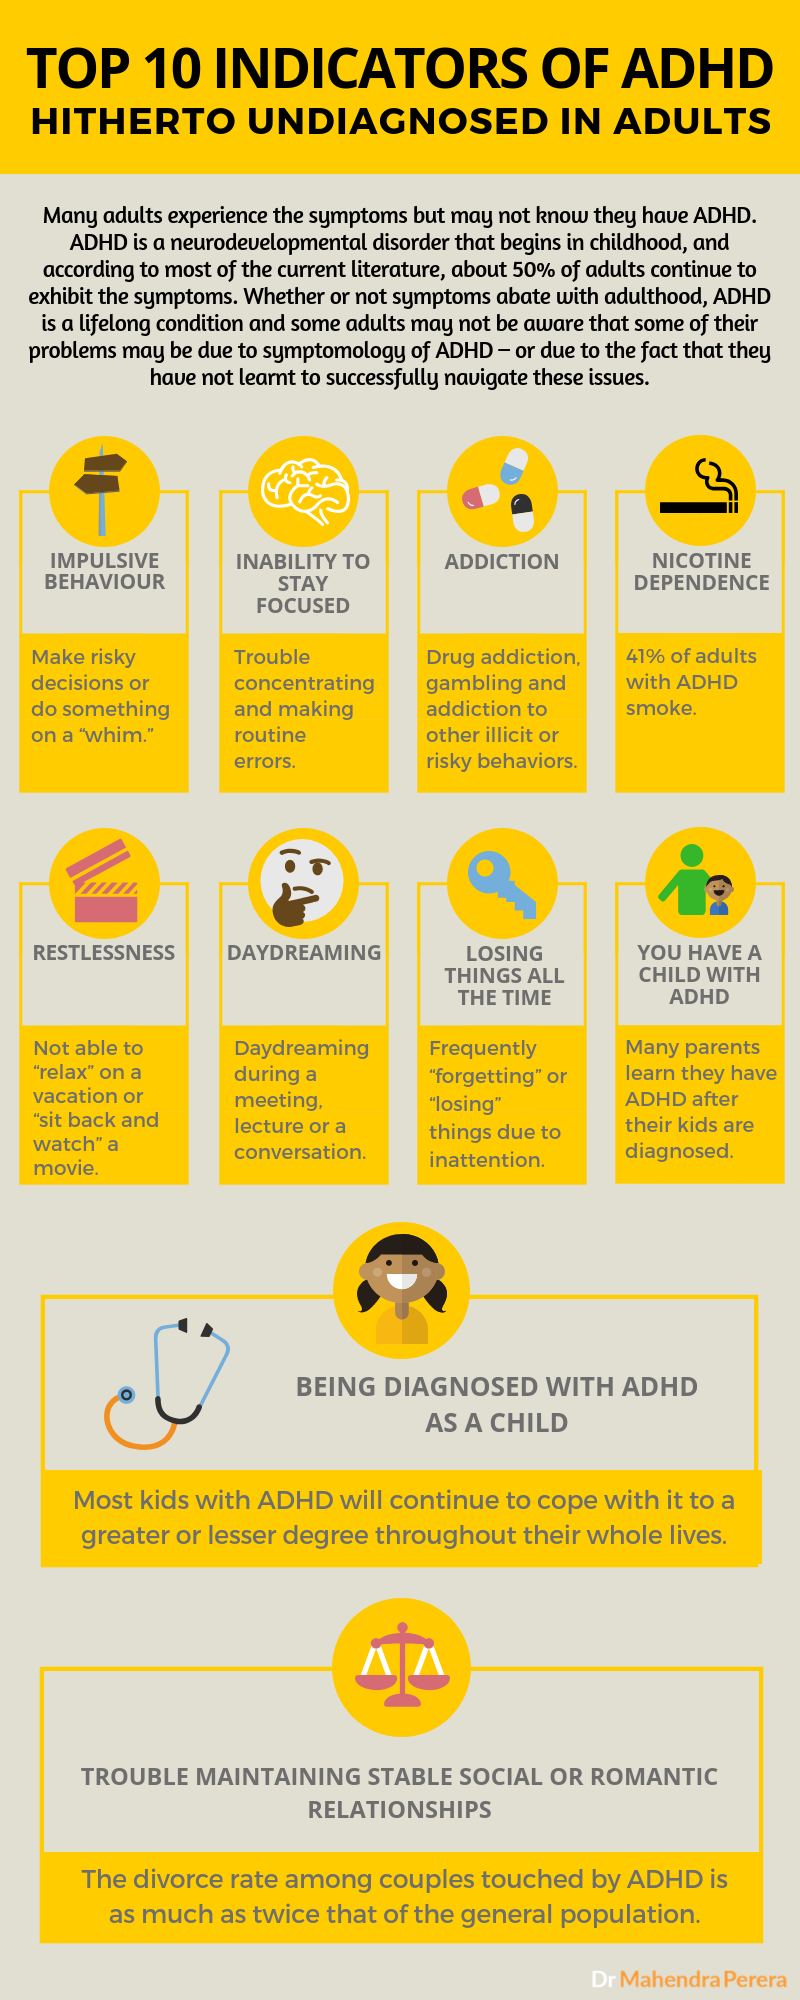 TOP 10 INDICATORS OF ADHD HITHERTO UNDIAGNOSED IN ADULTS [INFOGRAPHIC]